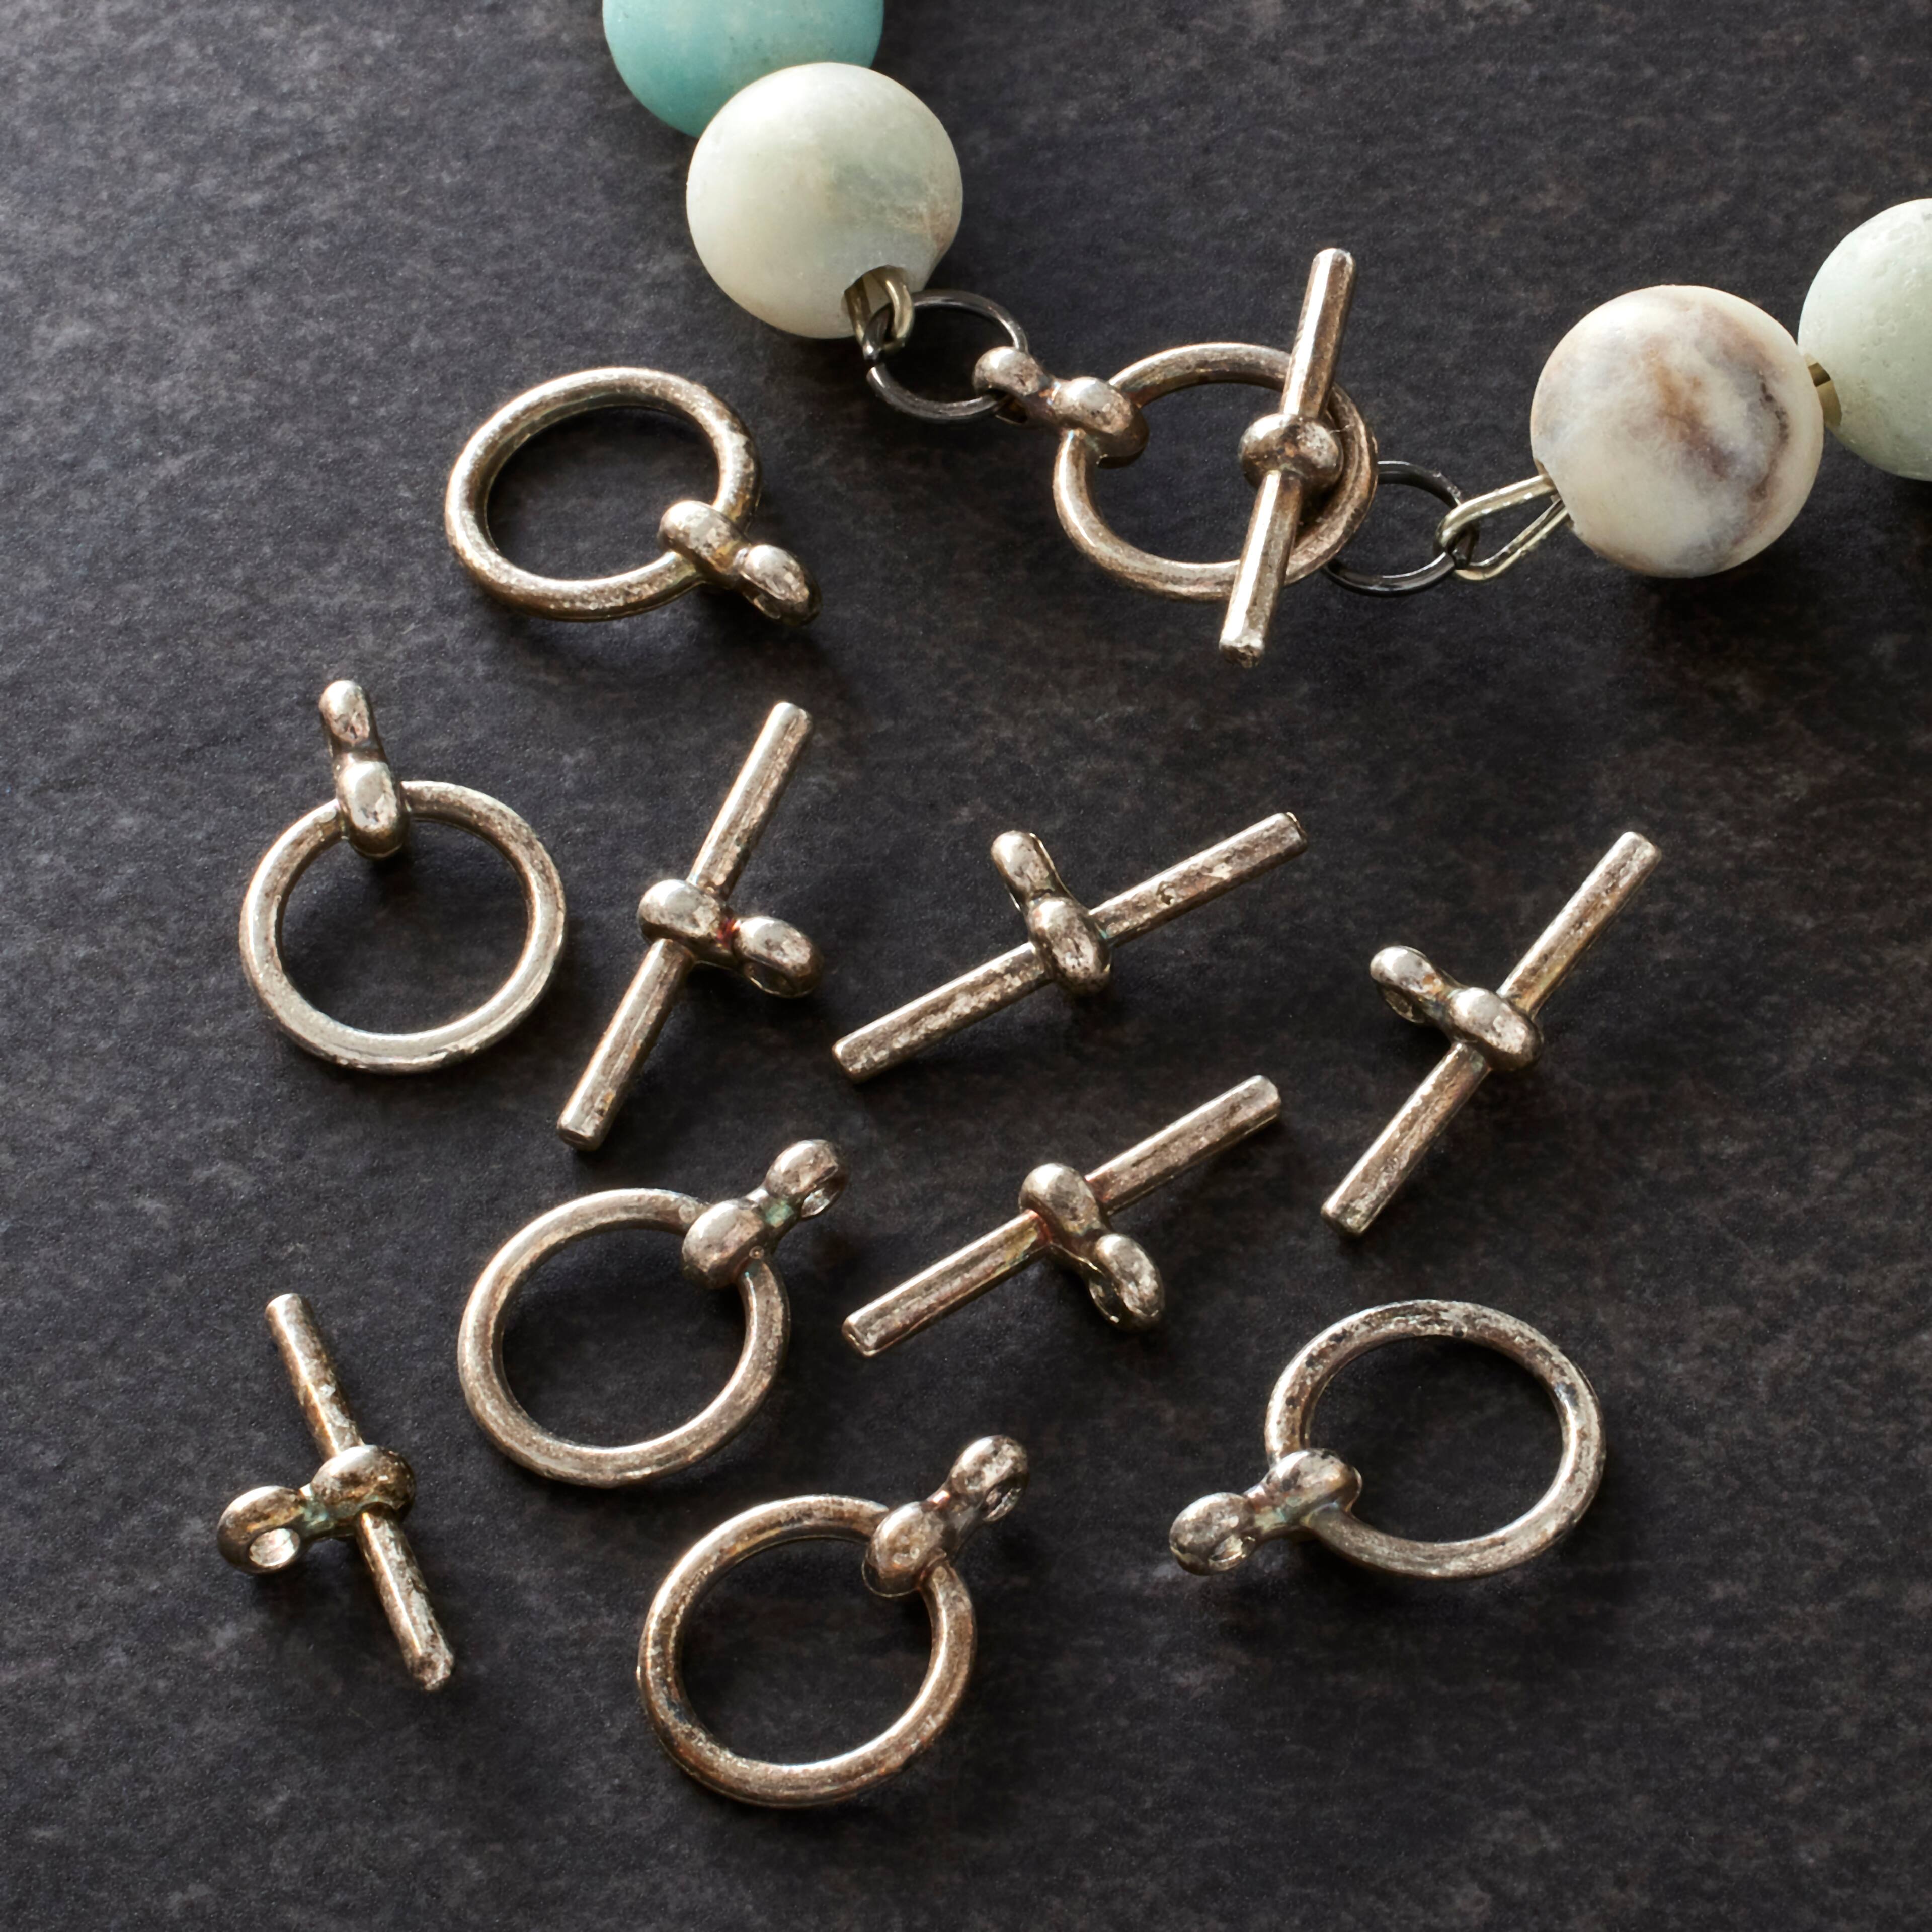 12mm Toggle Clasp Sets, 3ct. by Bead Landing™